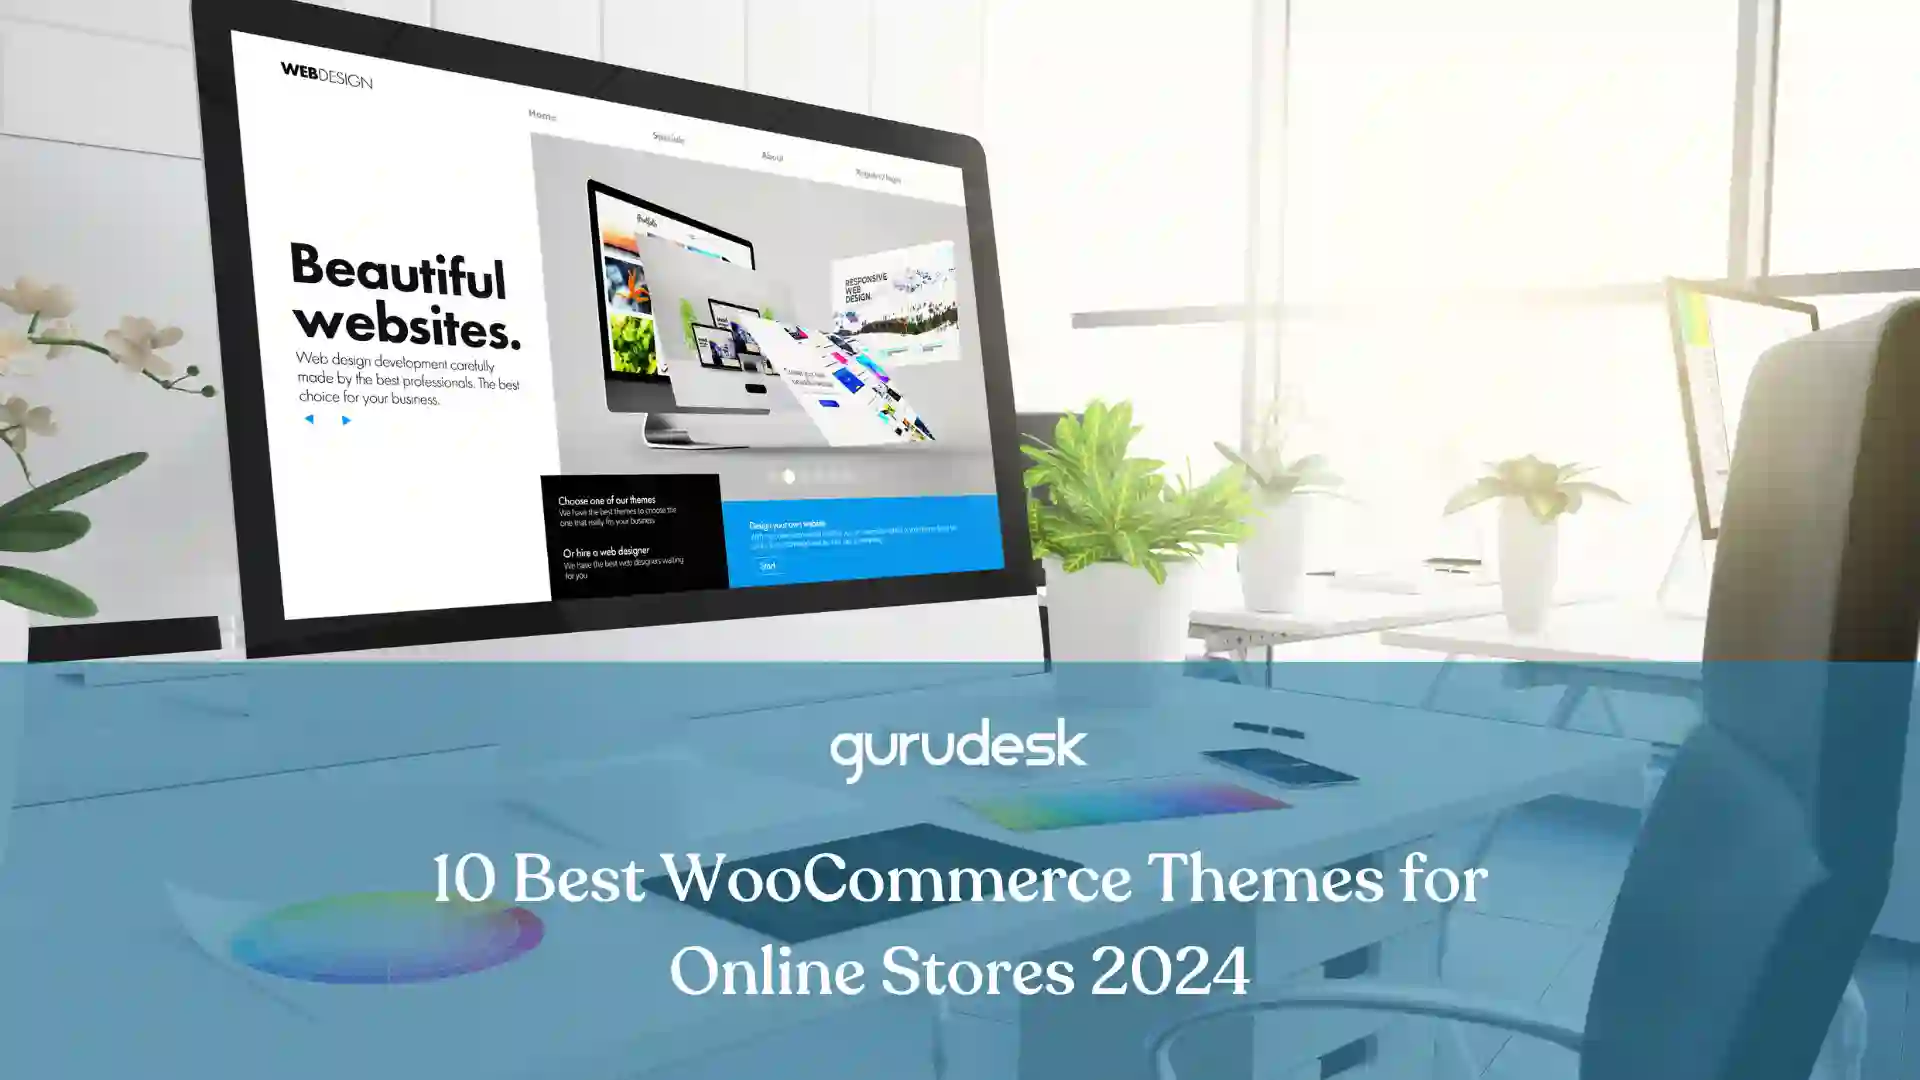 10 Best WooCommerce Themes for Online Stores 2024